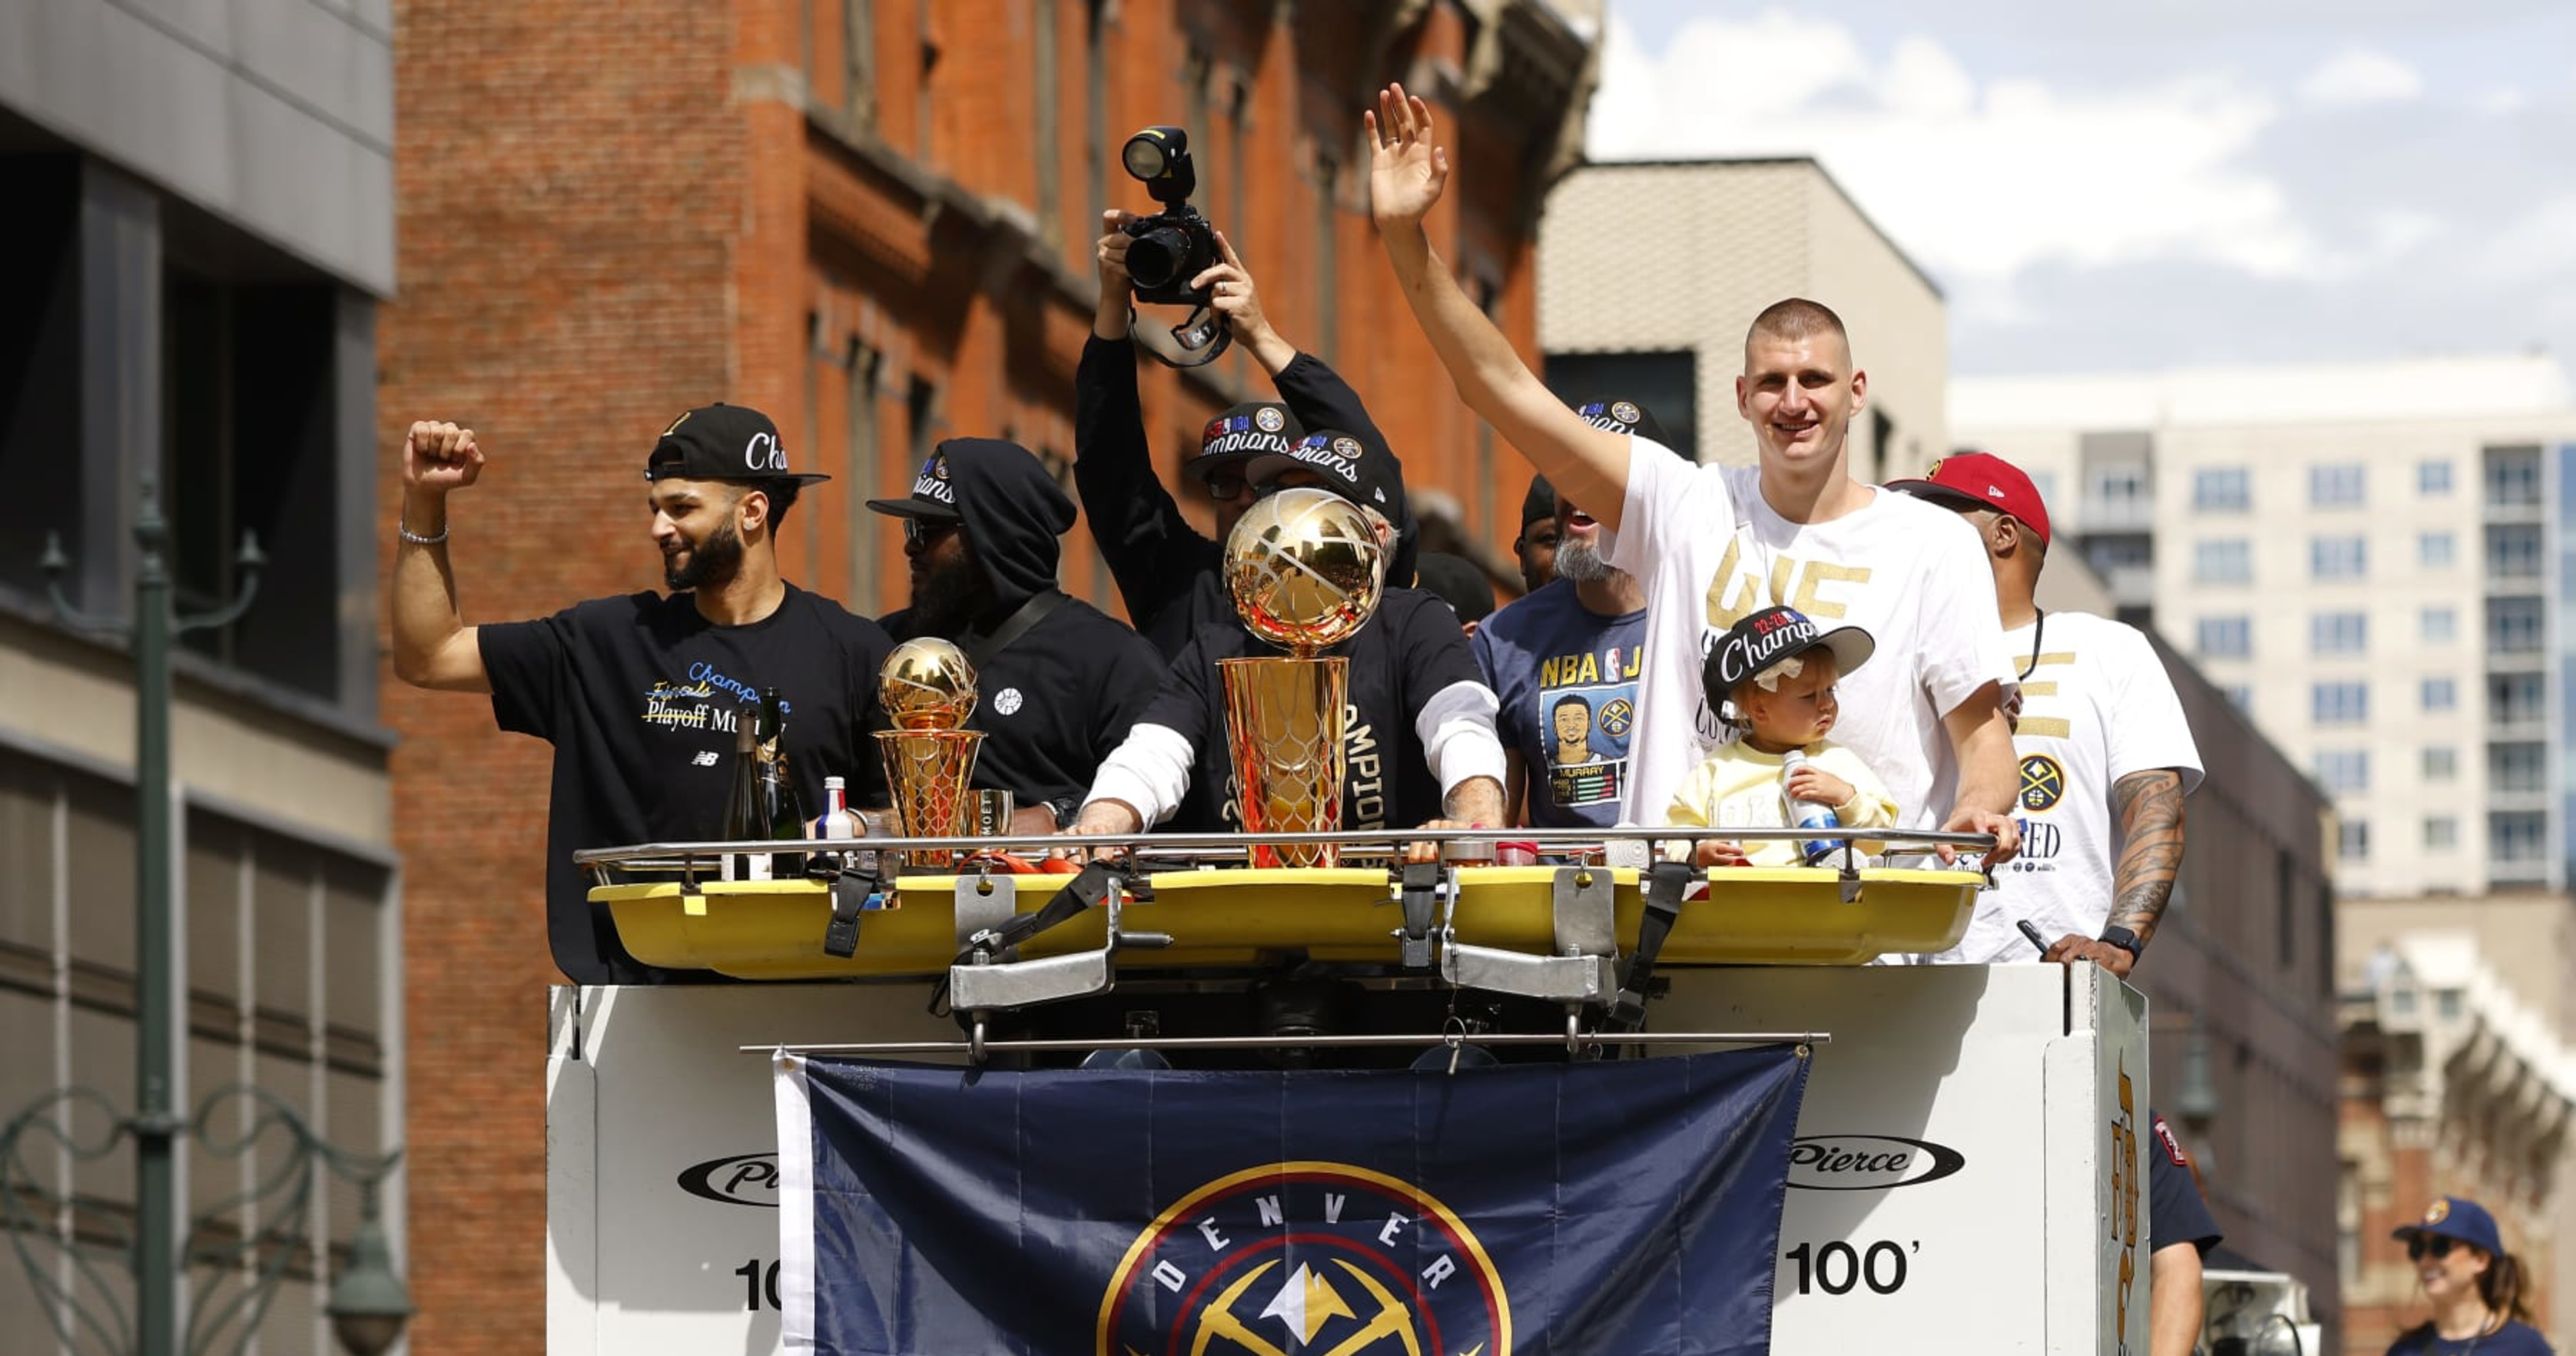 When was your city's last MLB, NBA, NFL or NHL championship parade